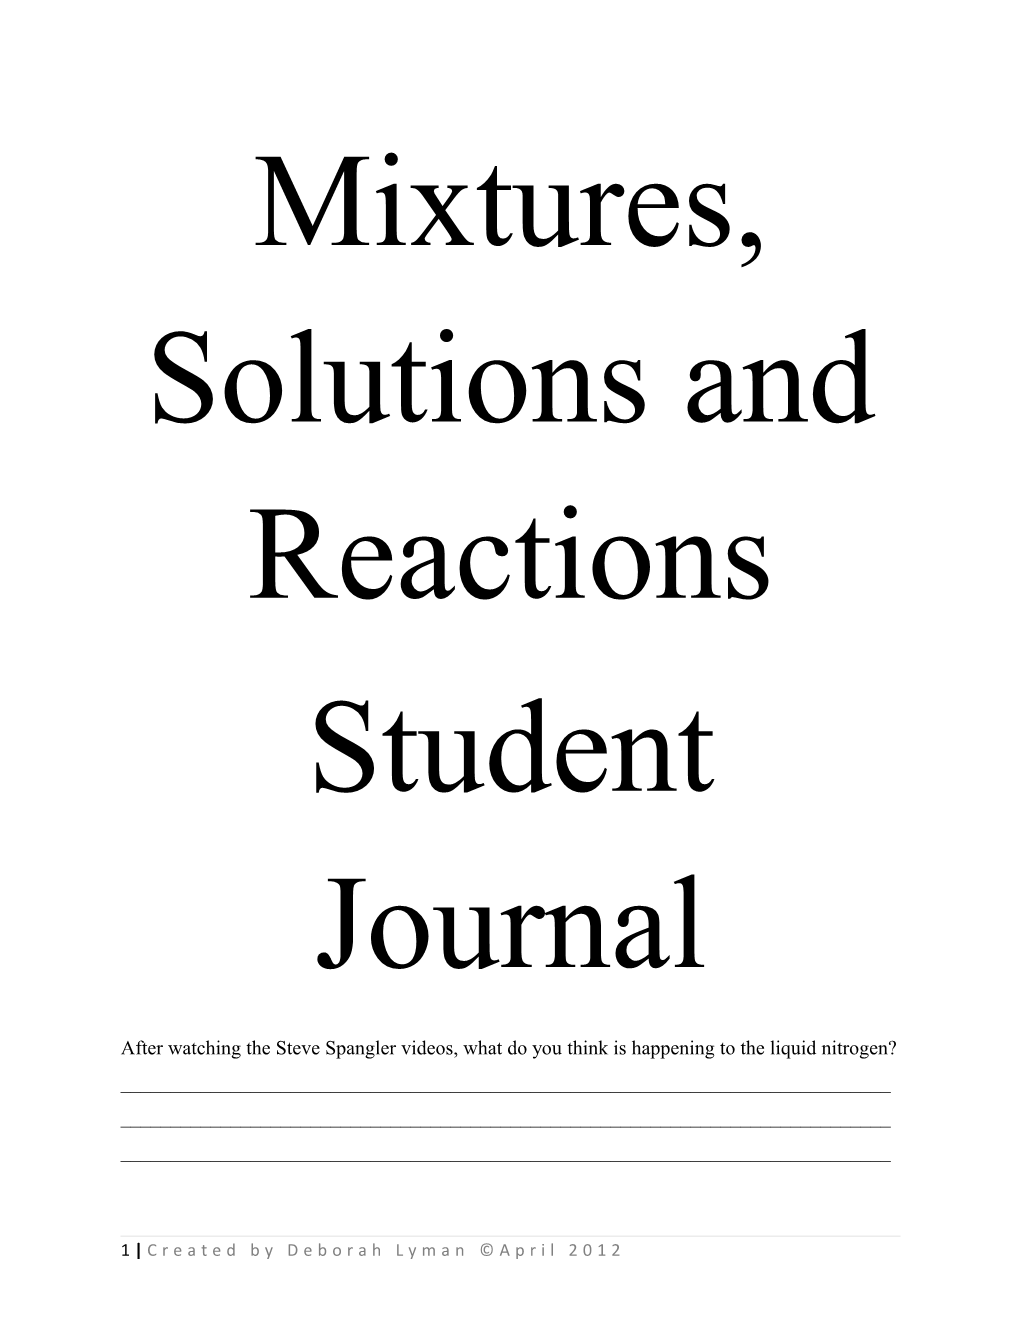 Mixtures, Solutions and Reactions